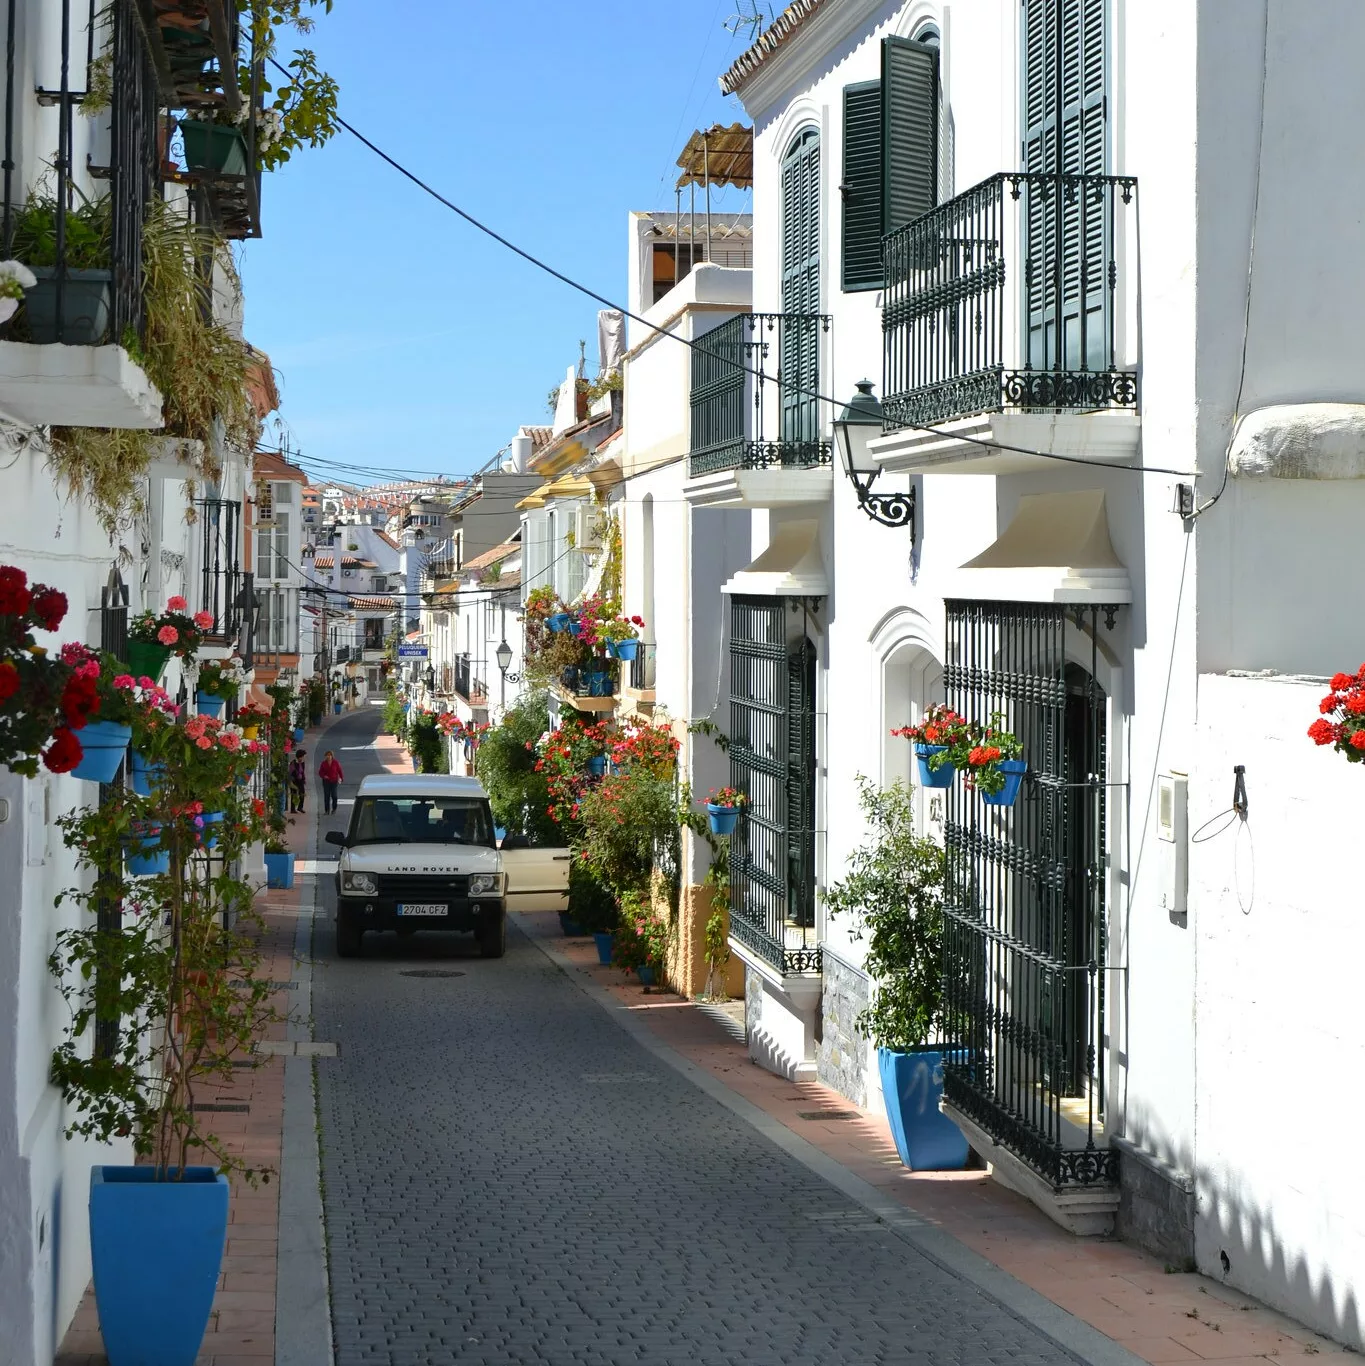 Where to Stay on the Costa del Sol: Best Towns and Resorts (Map included!)